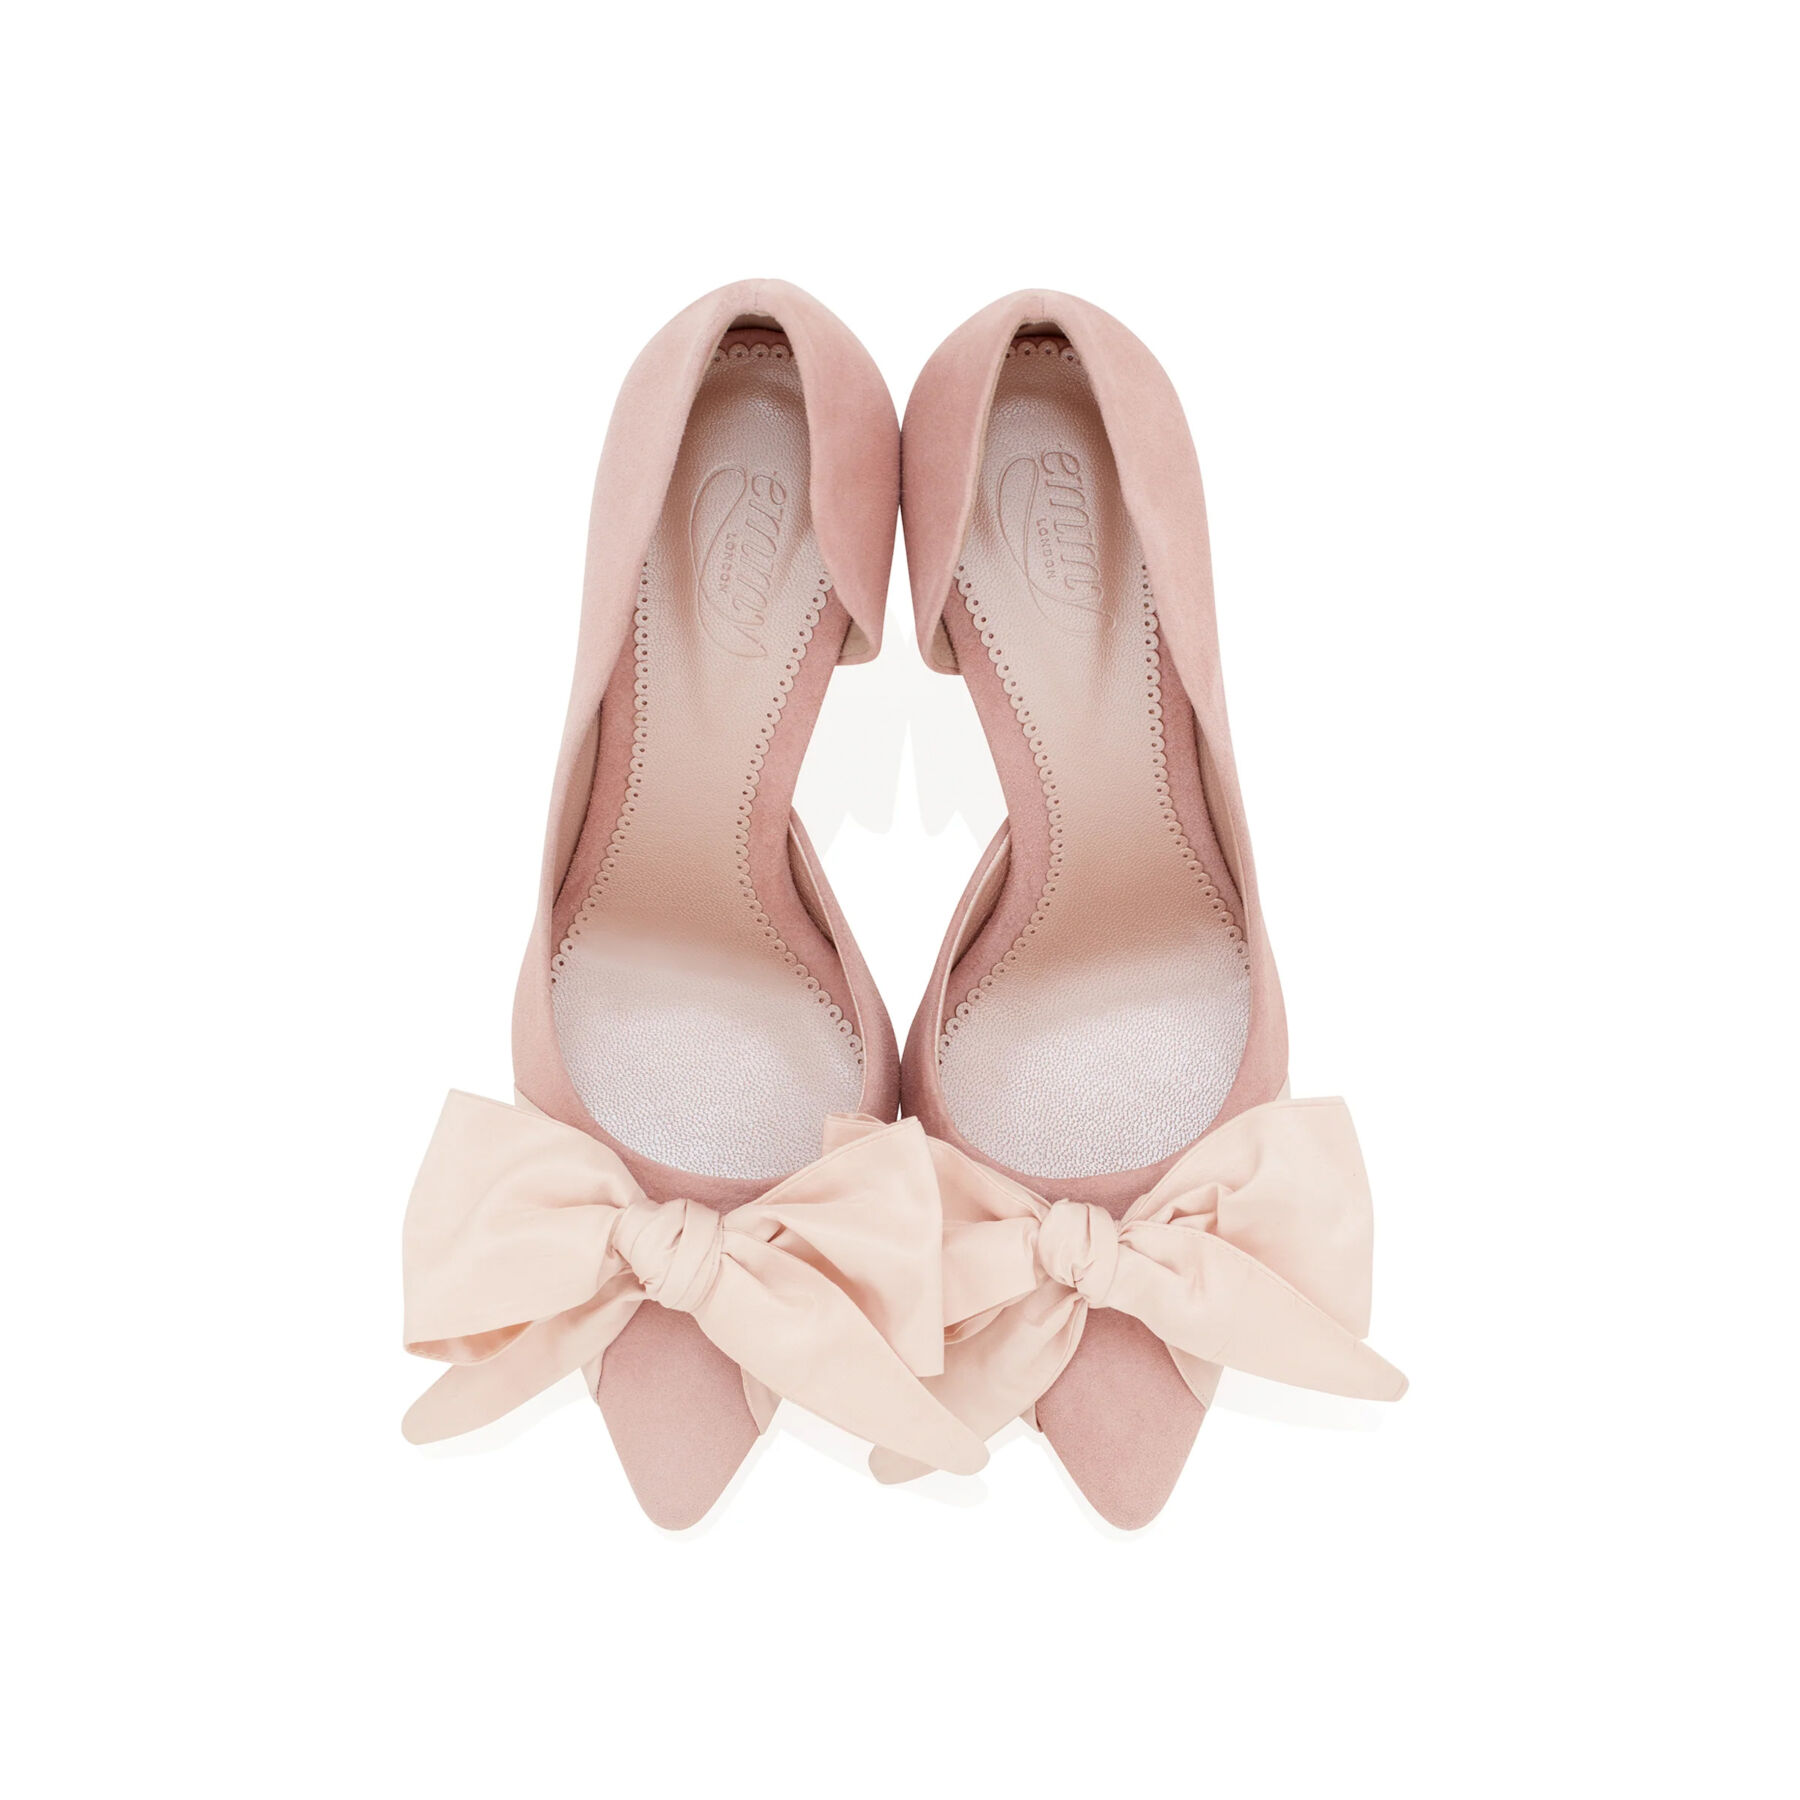 Emmy London pale pink bridal court shoes with bow